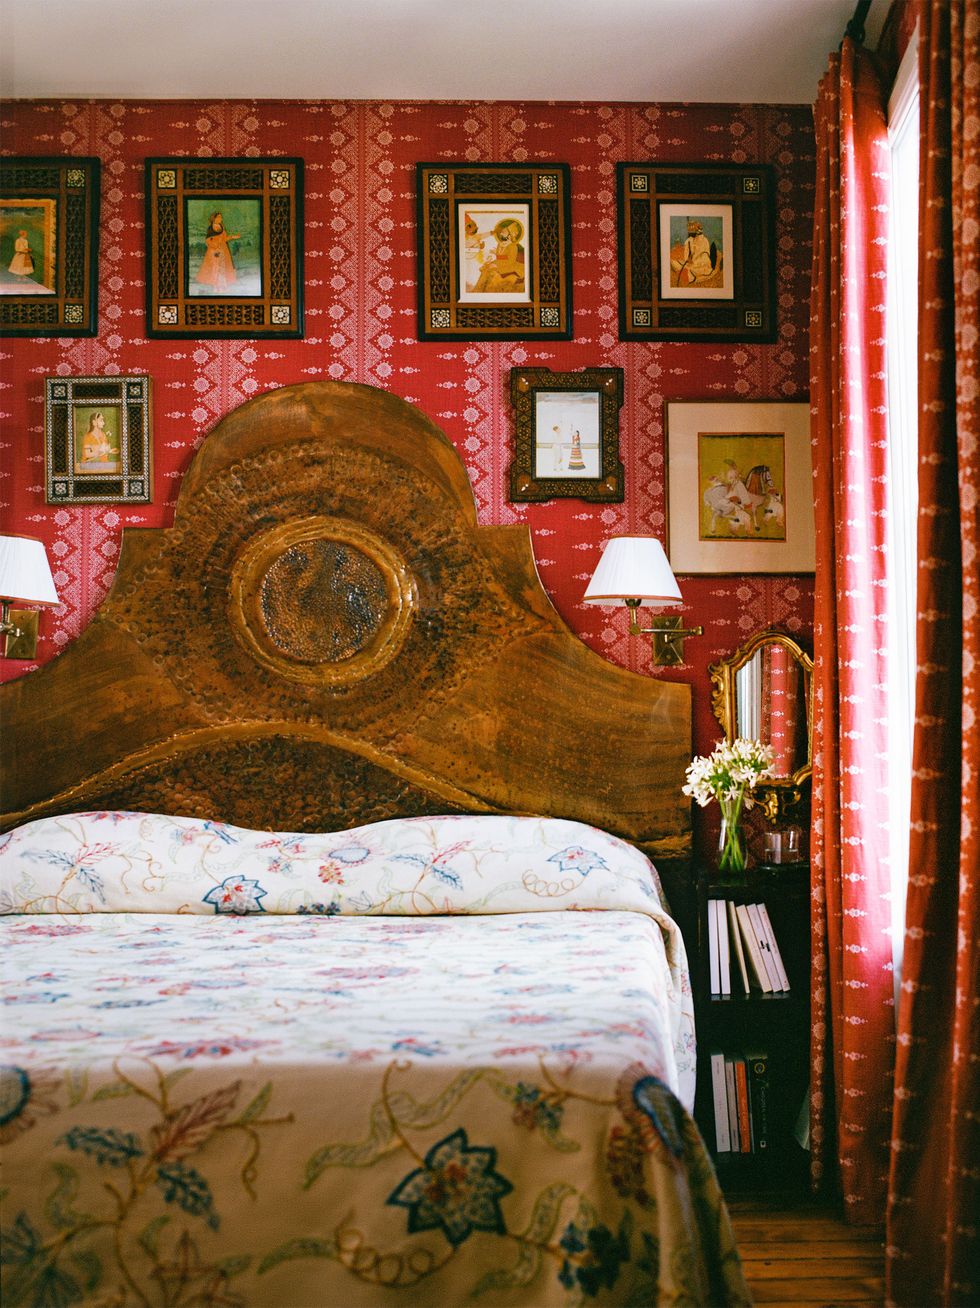 a large bed with a hammered copper headboard flanked by sconces with shades, floral printed bedcover, small bookshelf with mirror above, multiple framed artworks against red and white patterned wallpaper and curtains